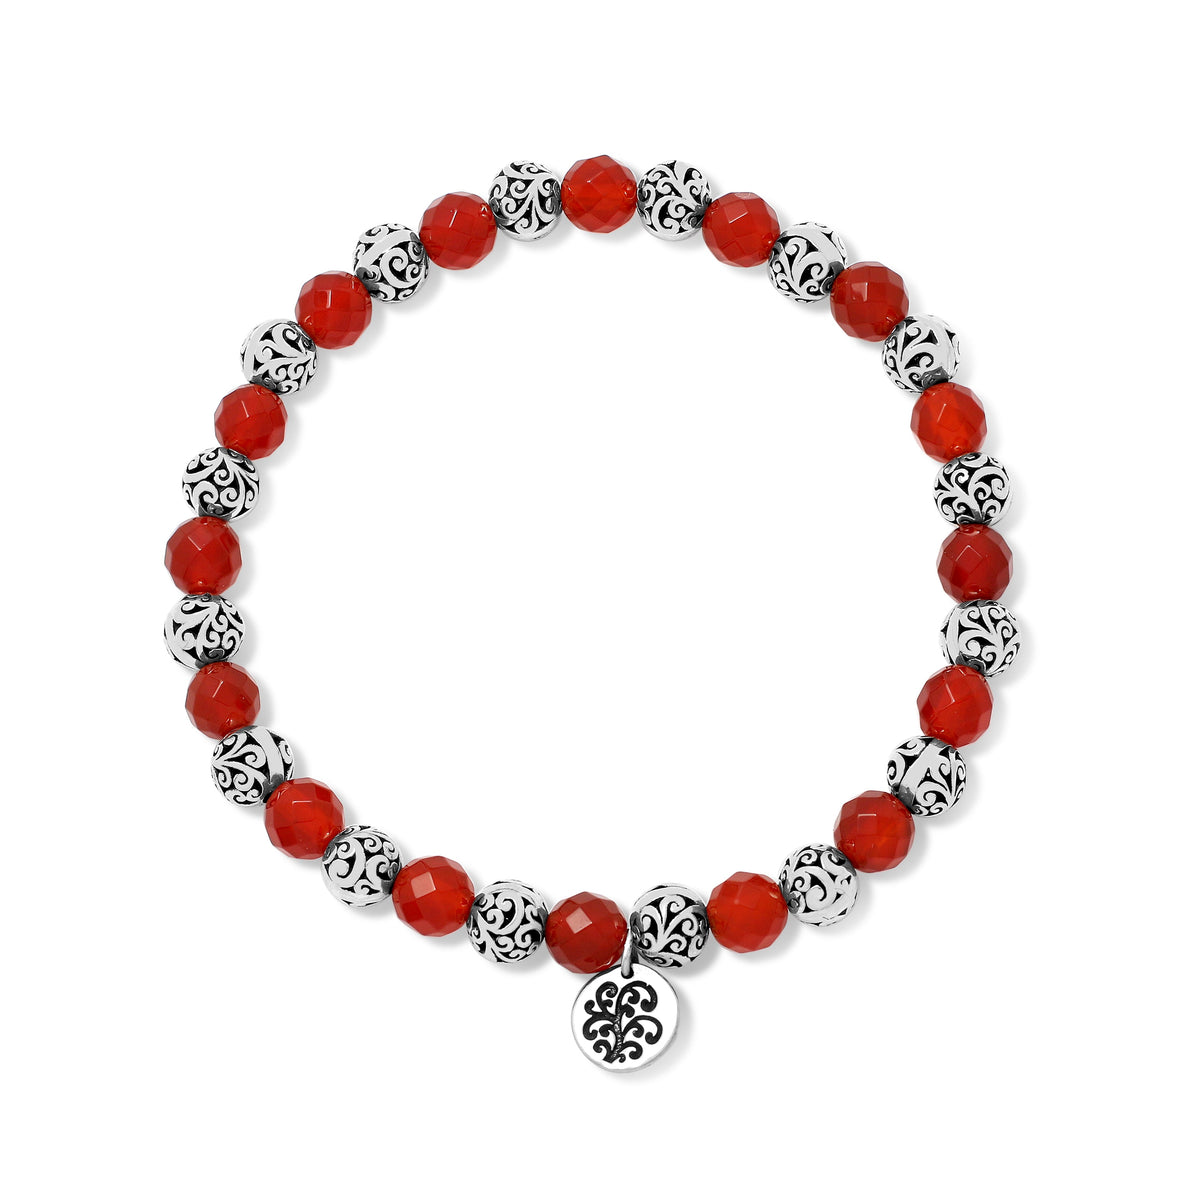 6 mm LH Signature Scroll and Red Carnelian Alternated Beads Stretch Bracelet